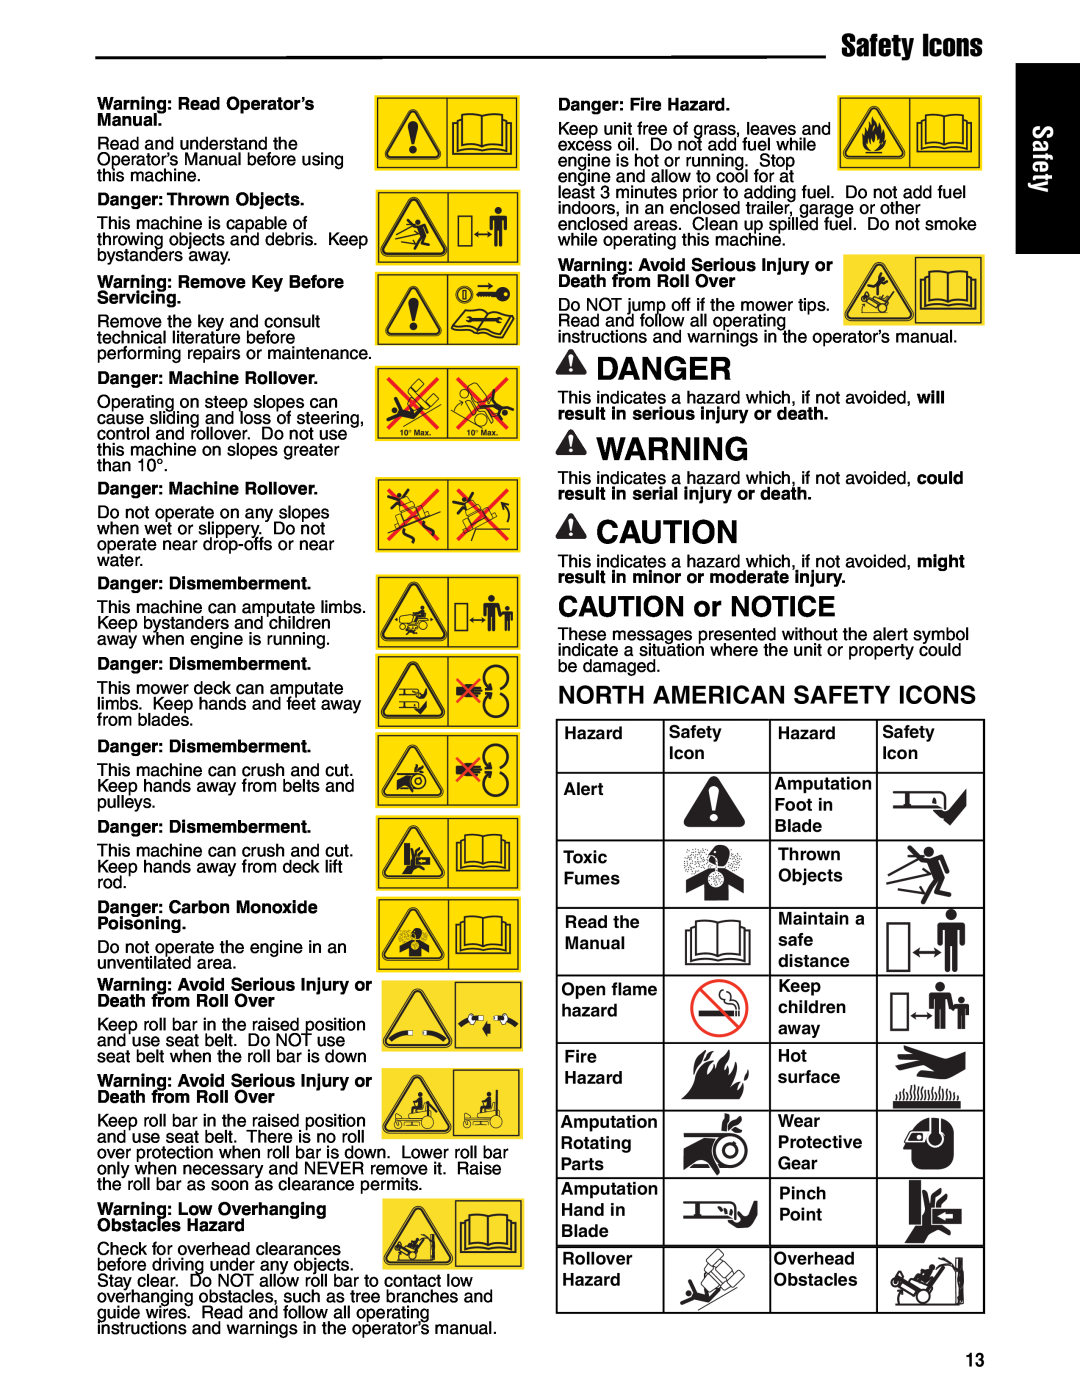 Ferris Industries 5901179, 5901180, 5901181, 5901178, 5900626 manual Danger, CAUTION or NOTICE, North American Safety Icons 